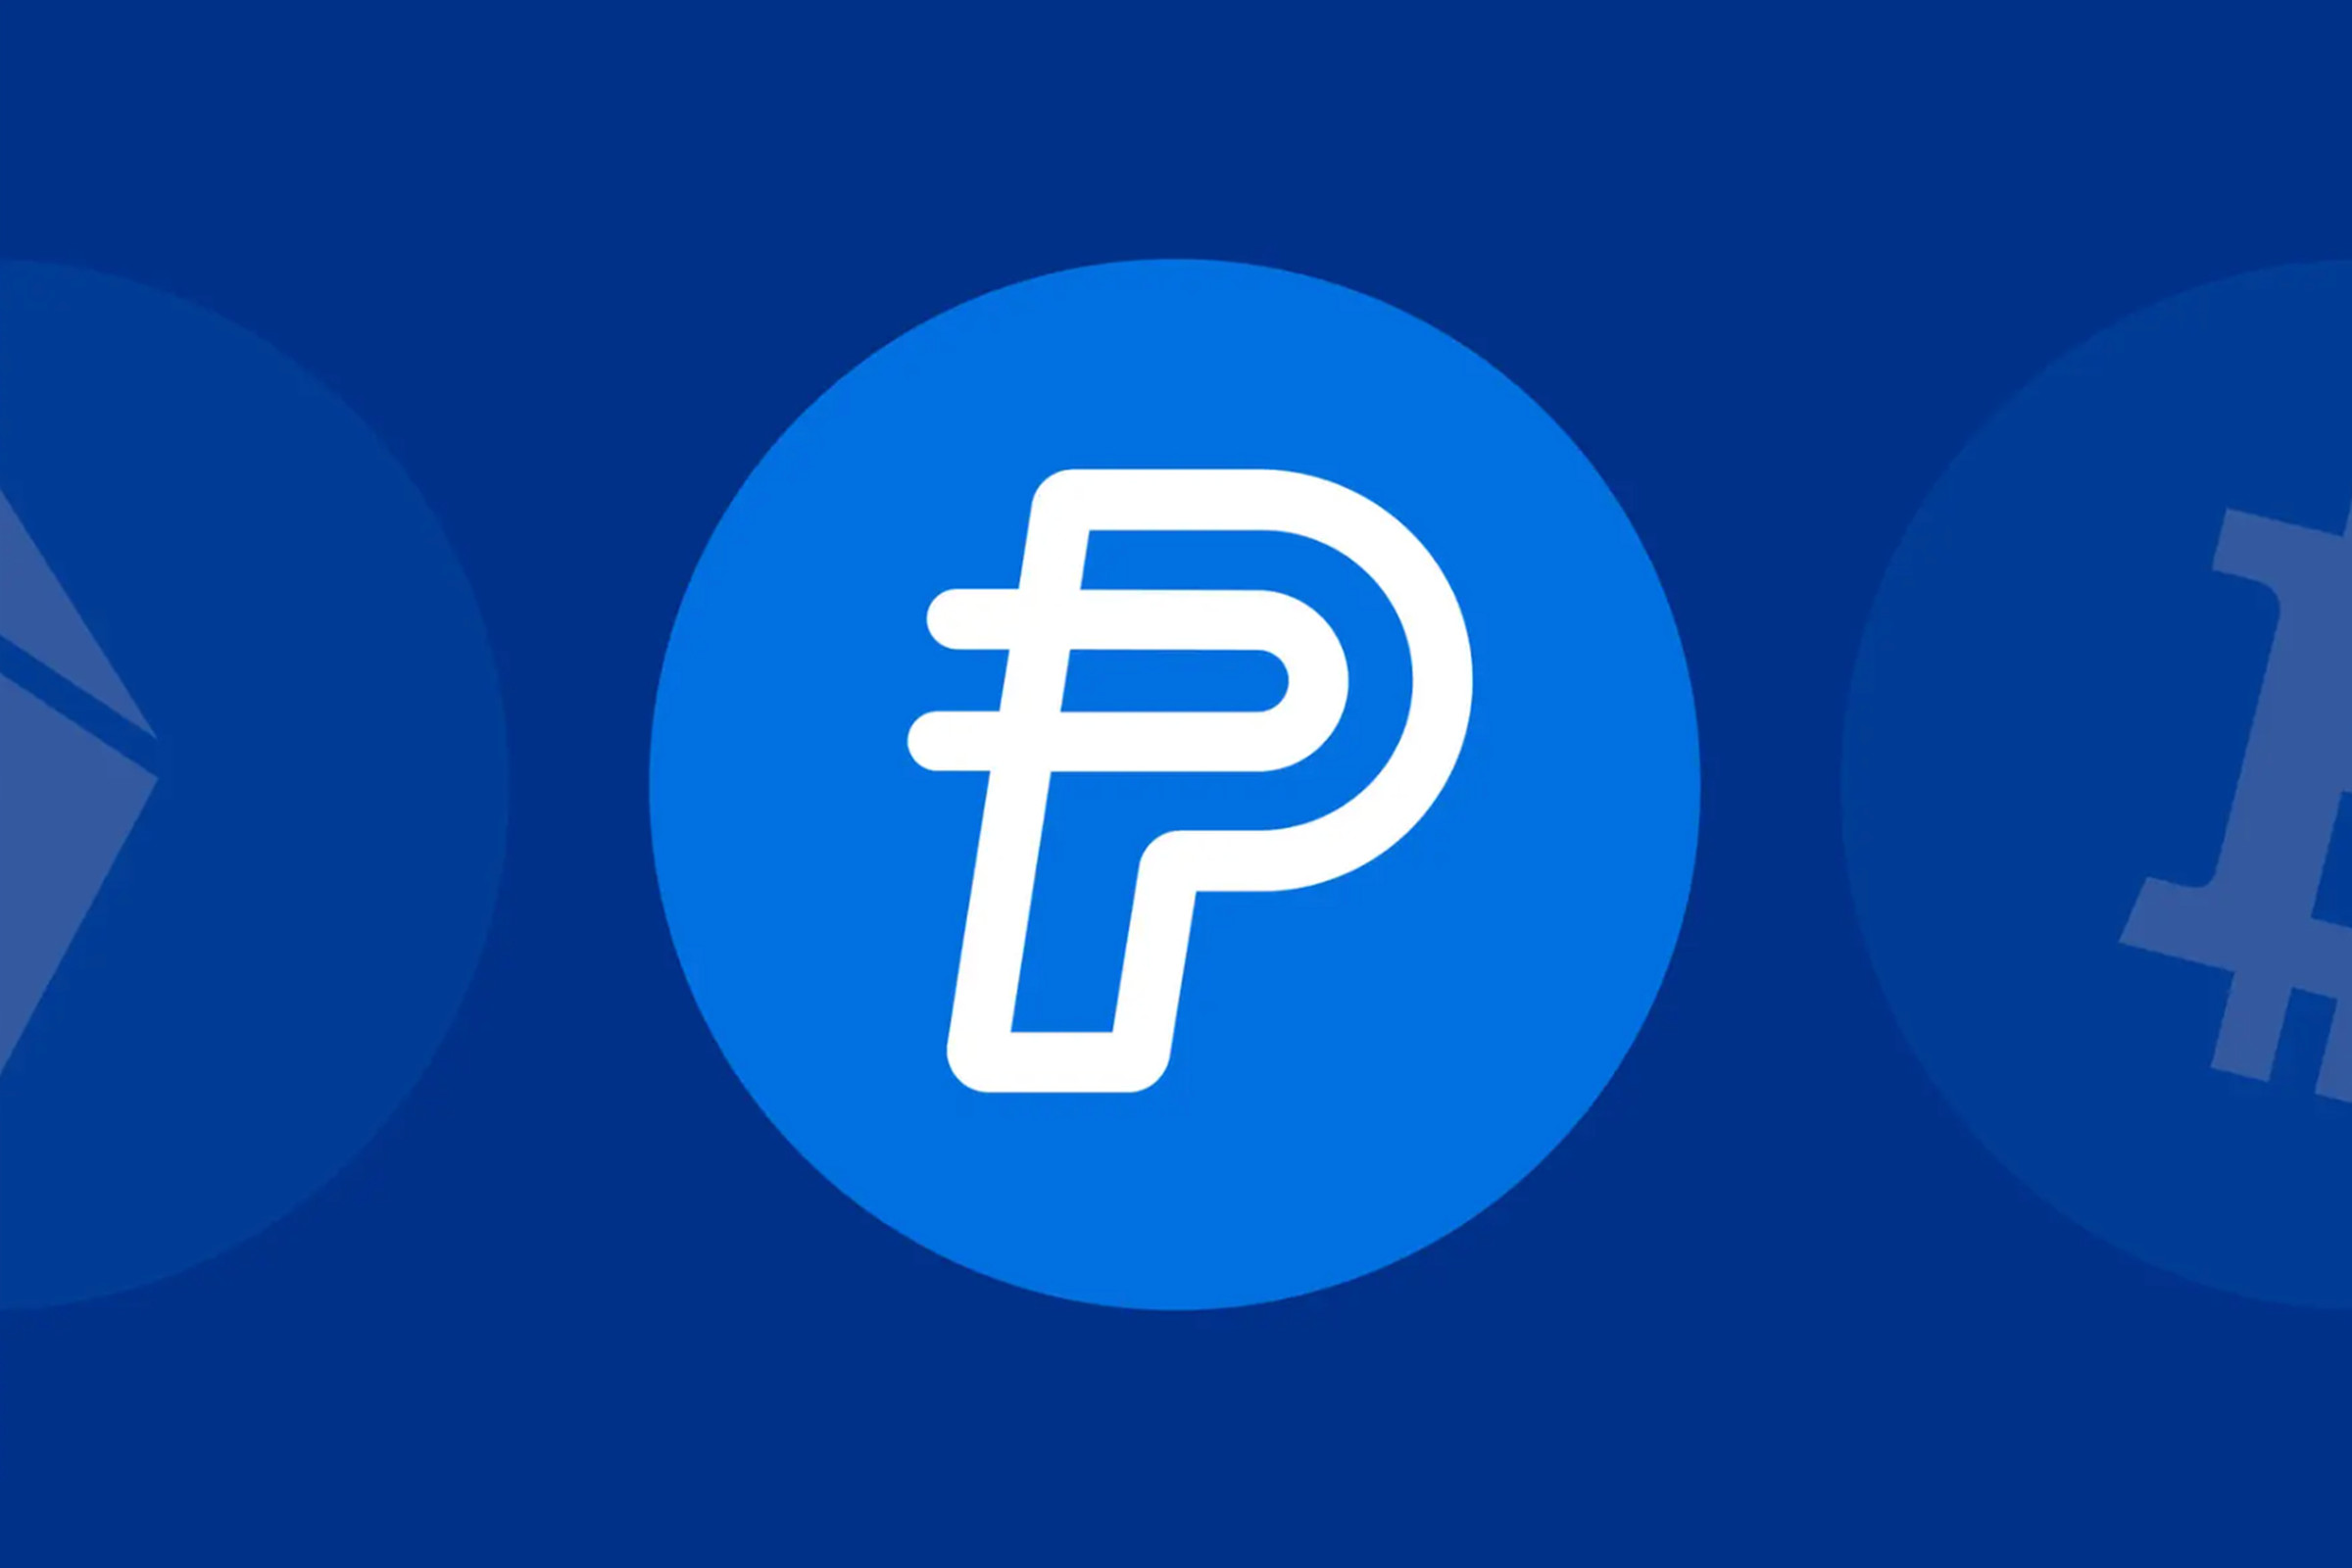 The PayPal USD stablecoin logo: a Blue circle with a white letter P inside, with the top and bottom lines of the inner hole punched in the P extending out behind the letter instead of enclosing.